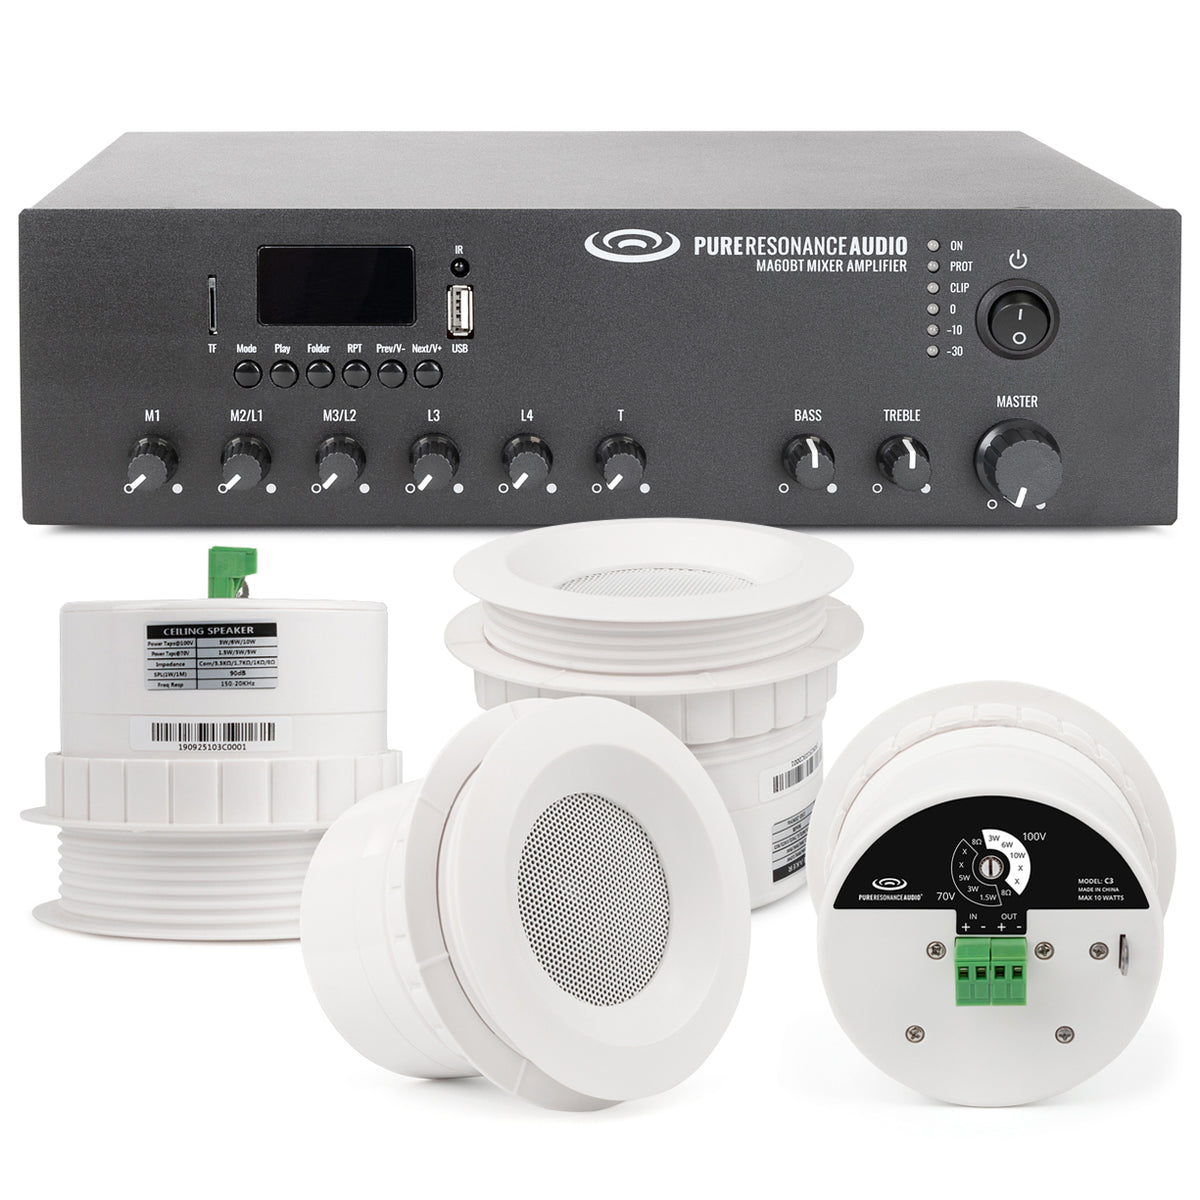 Meet our stylish micro CD hi-fi systems with Bluetooth streaming